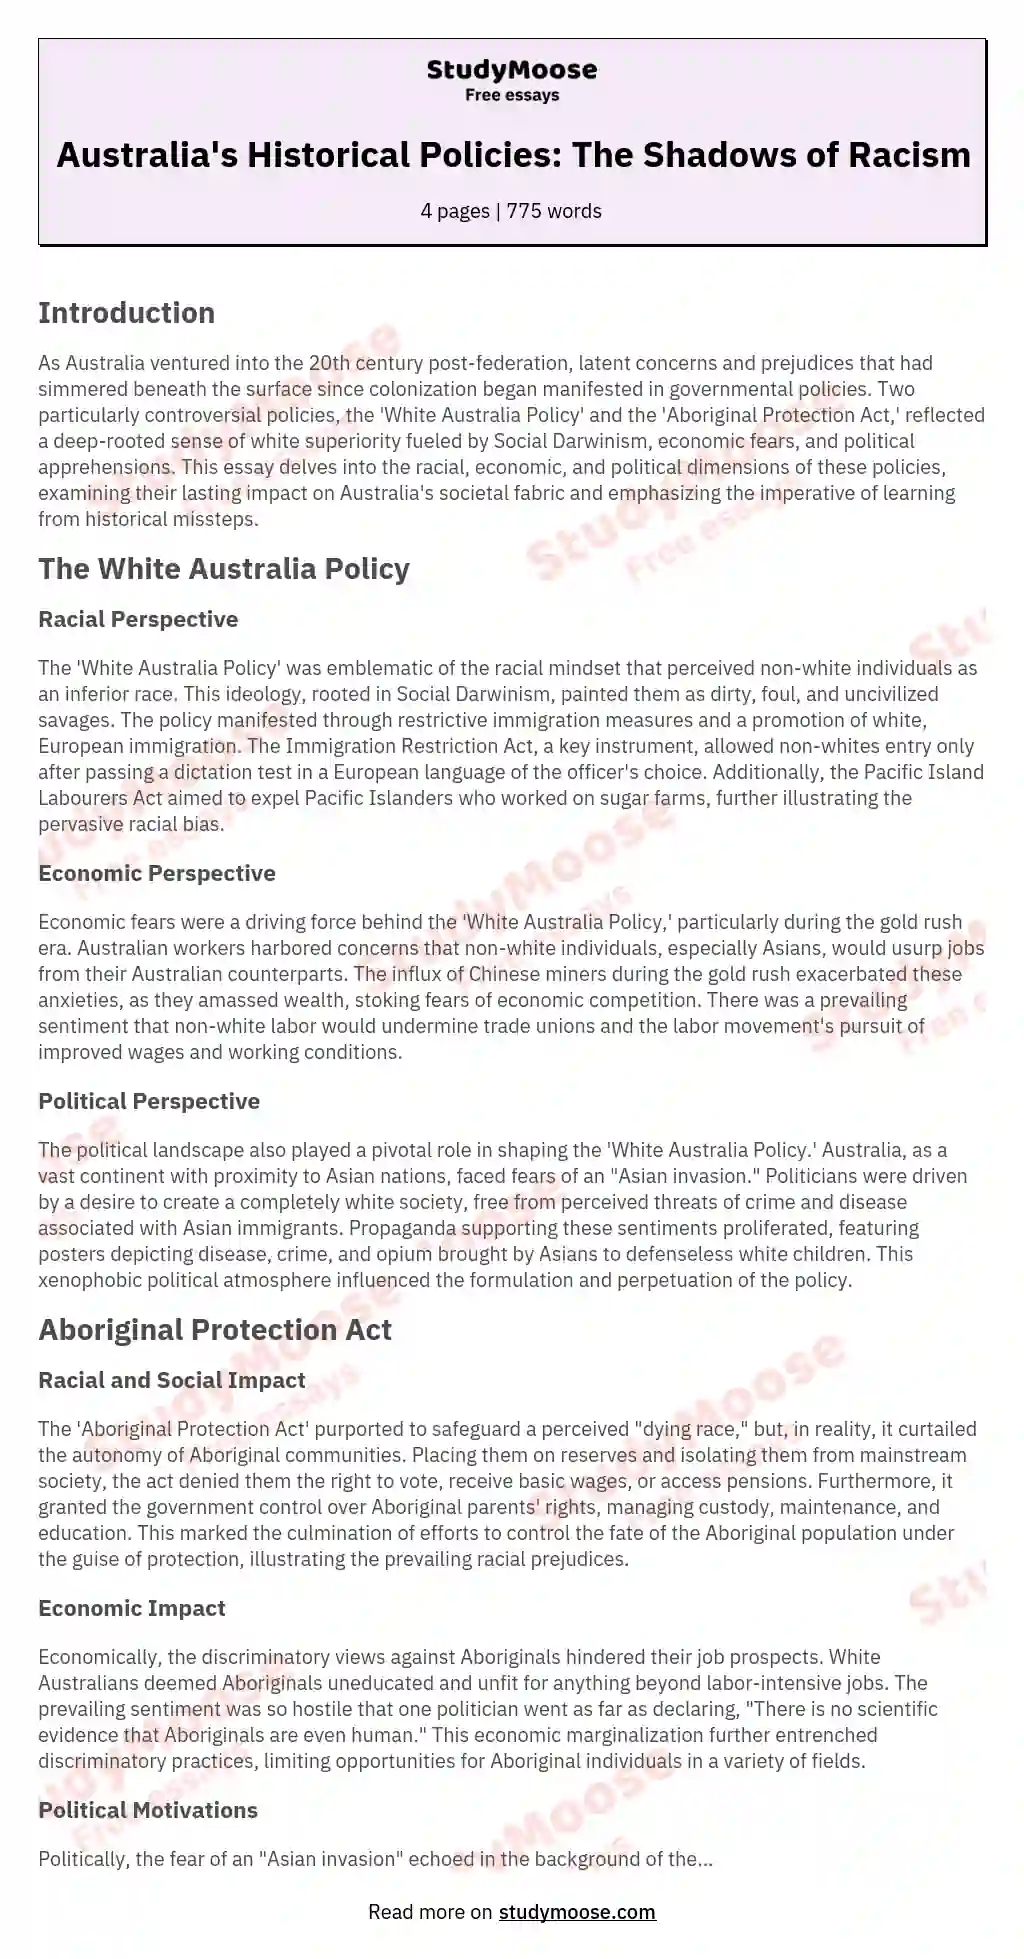 Australia's Historical Policies: The Shadows of Racism essay